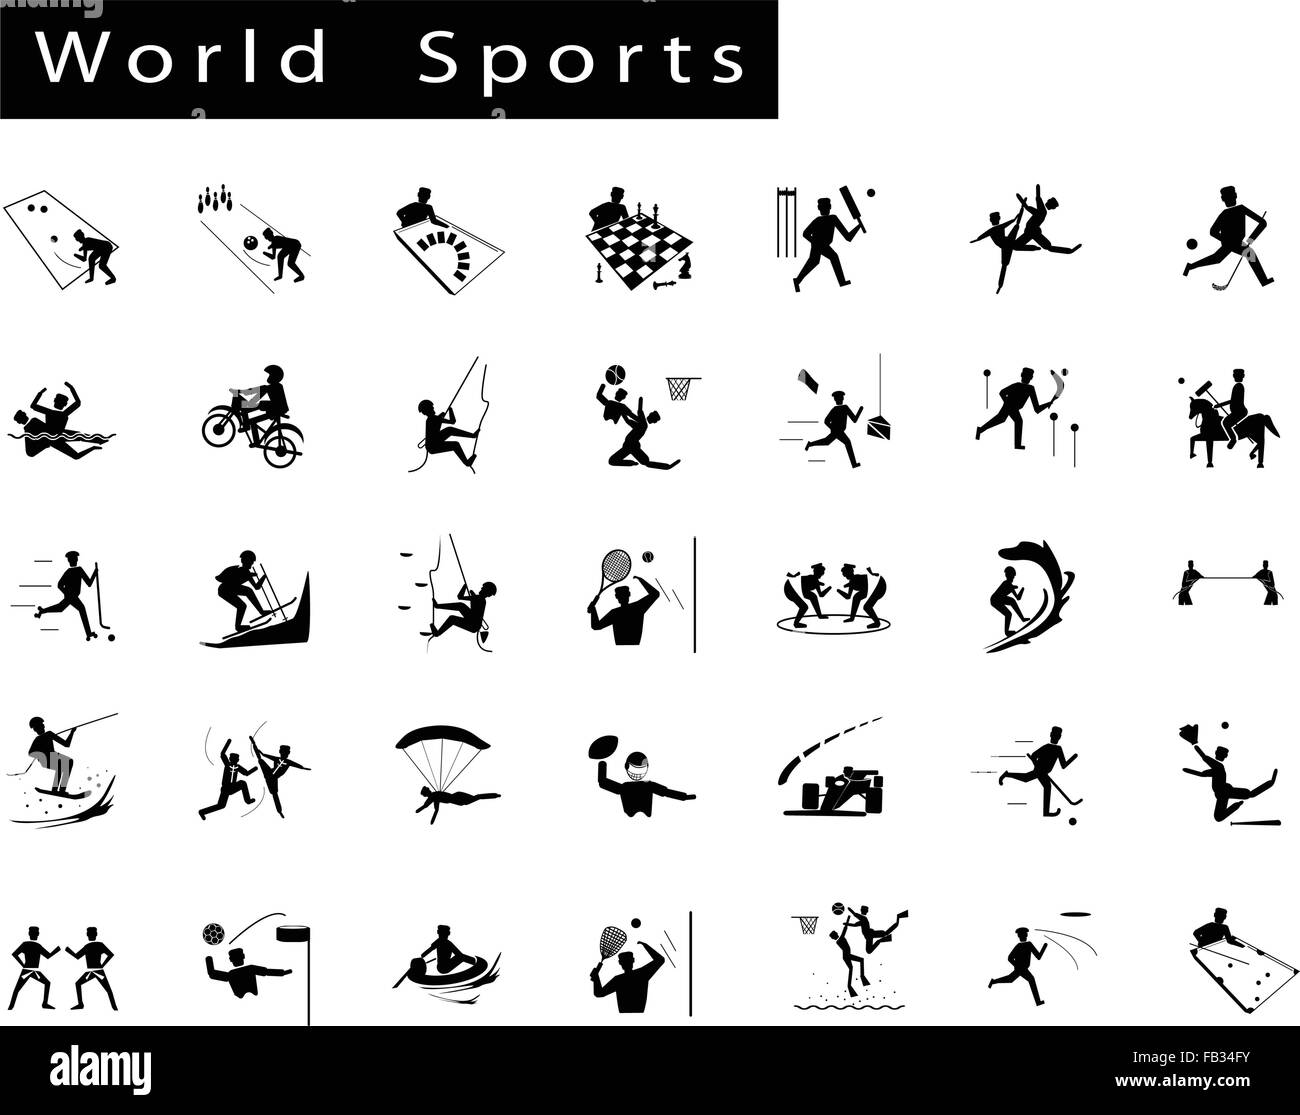 Illustration Collection of 35 World Sport Icons on White Background. Stock Vector